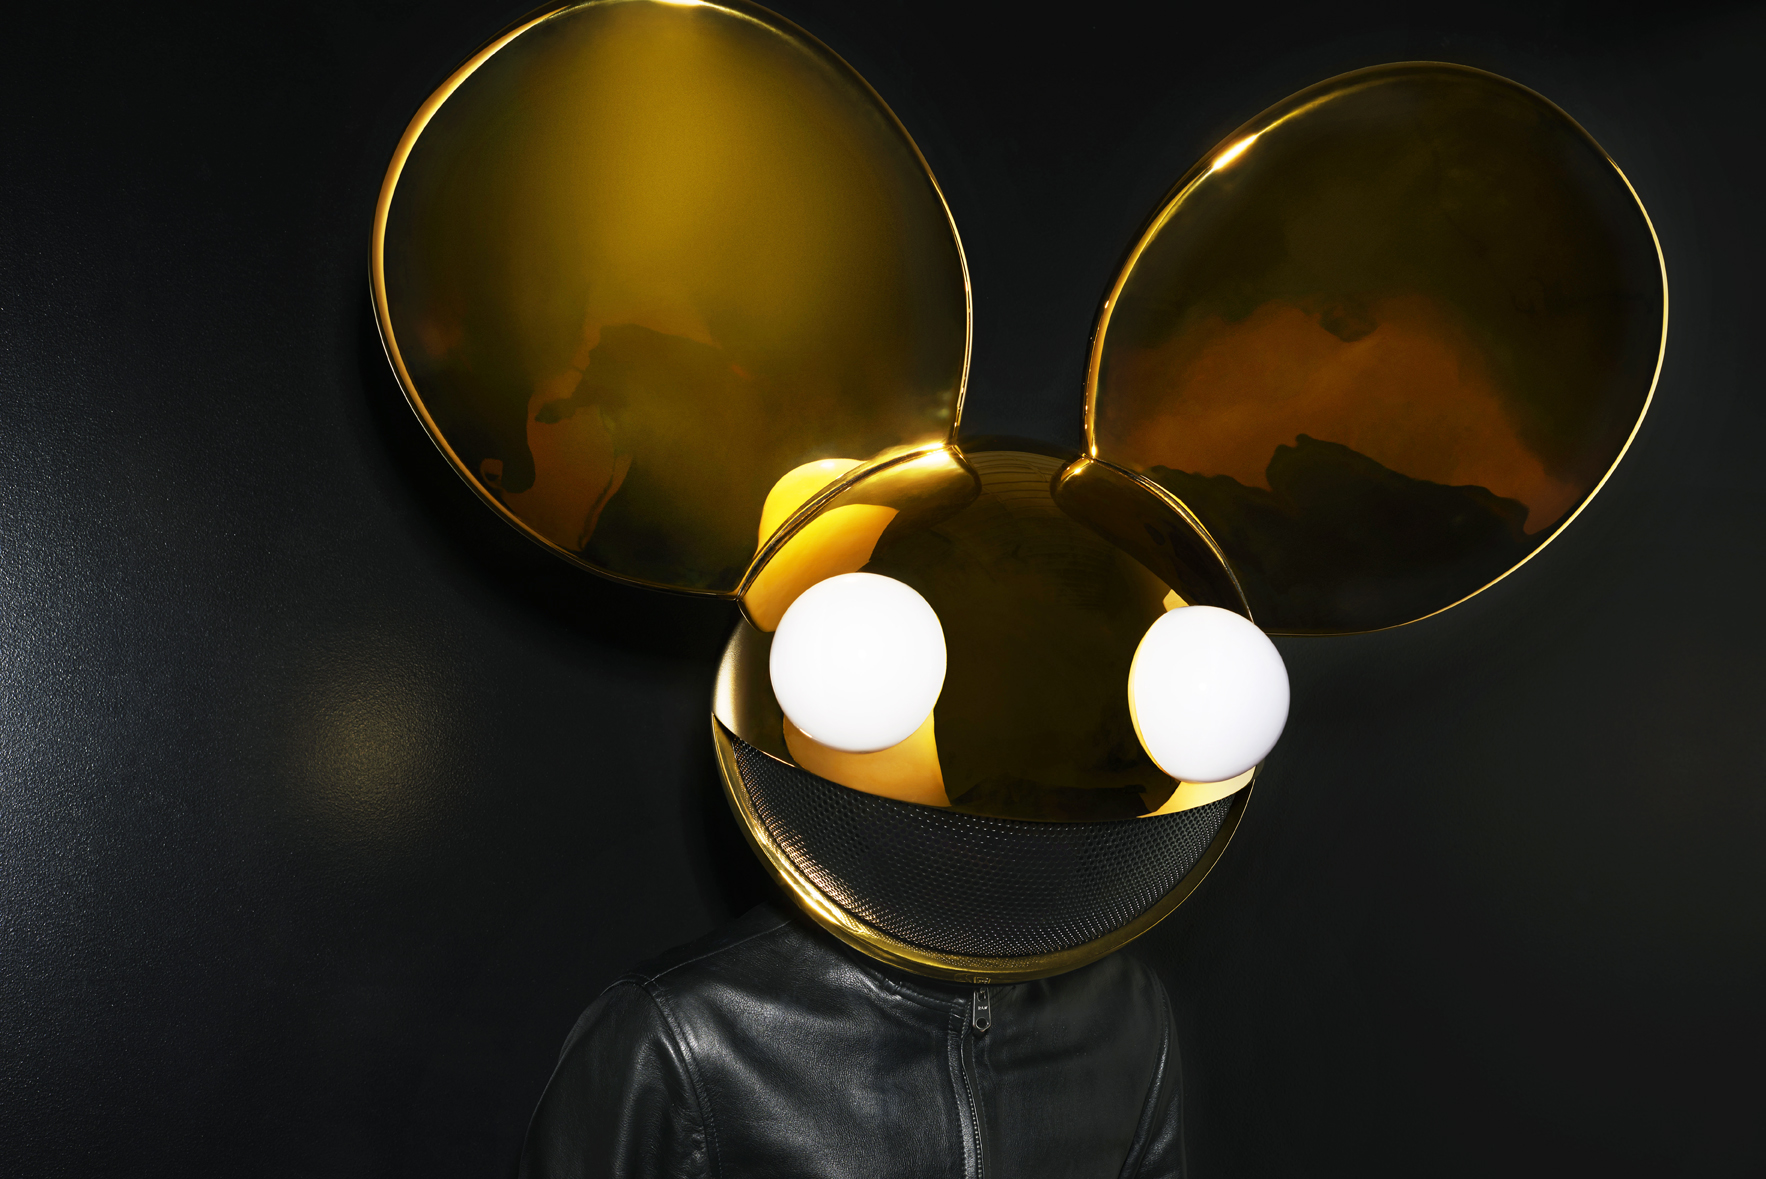 Deadmau5: One of the highest paid EDM producers in the world